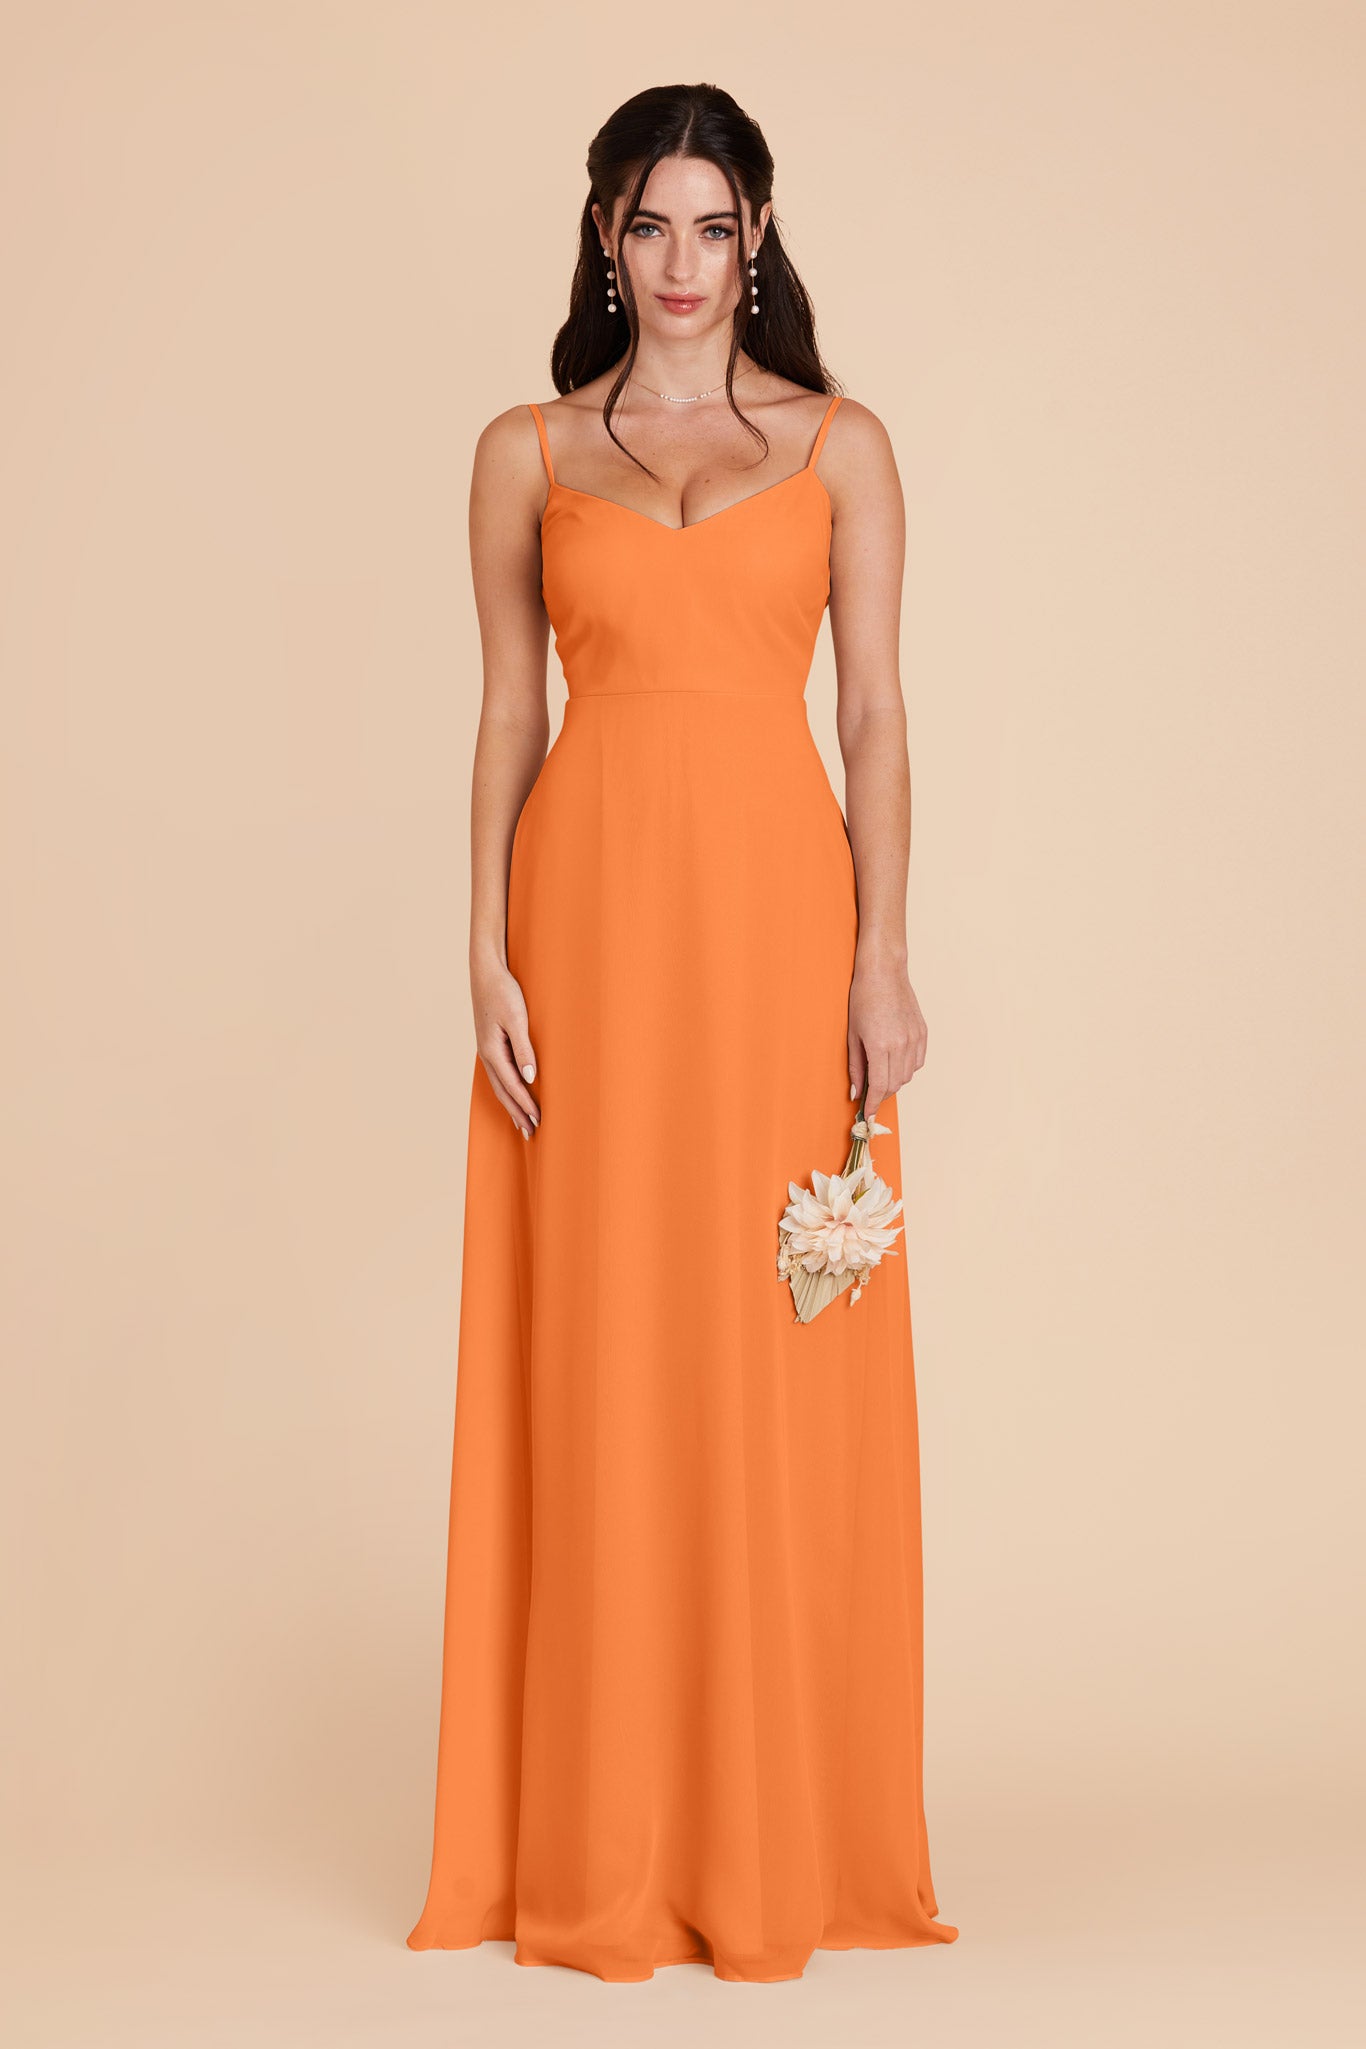 Apricot Devin Convertible Dress by Birdy Grey